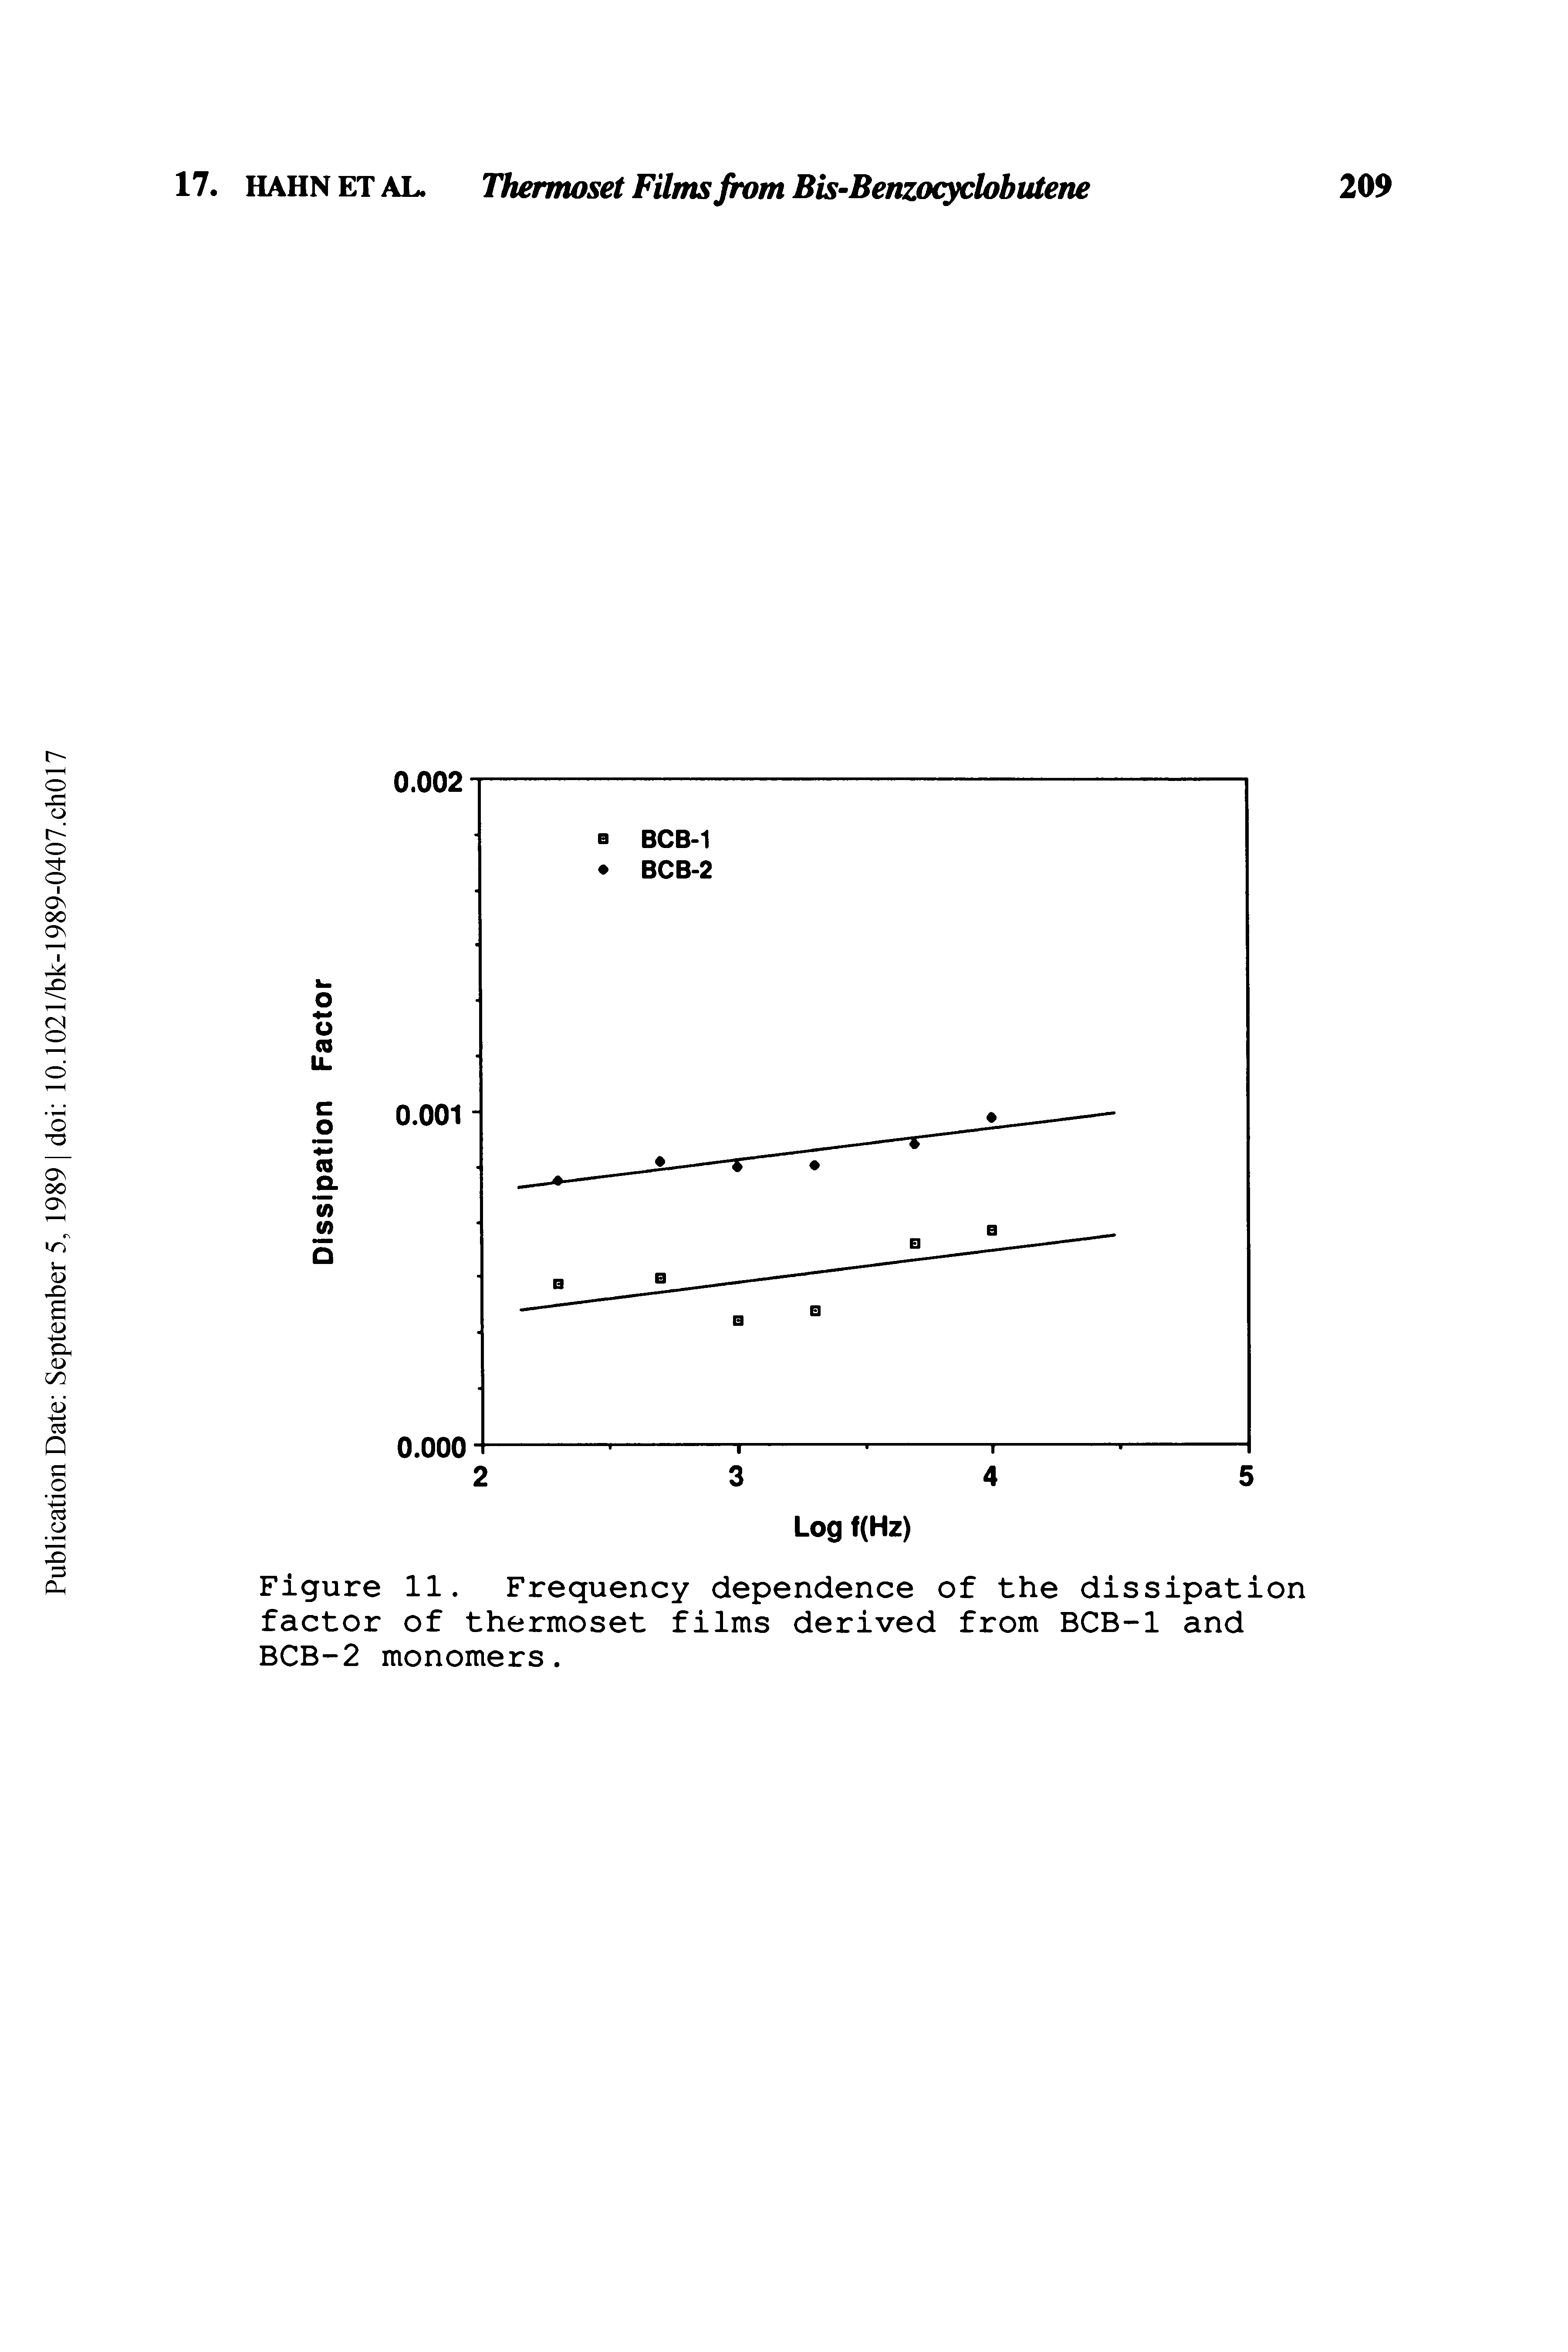 Figure 11. Frequency dependence of the dissipation factor of thermoset films derived from BCB-1 and BCB-2 monomers.